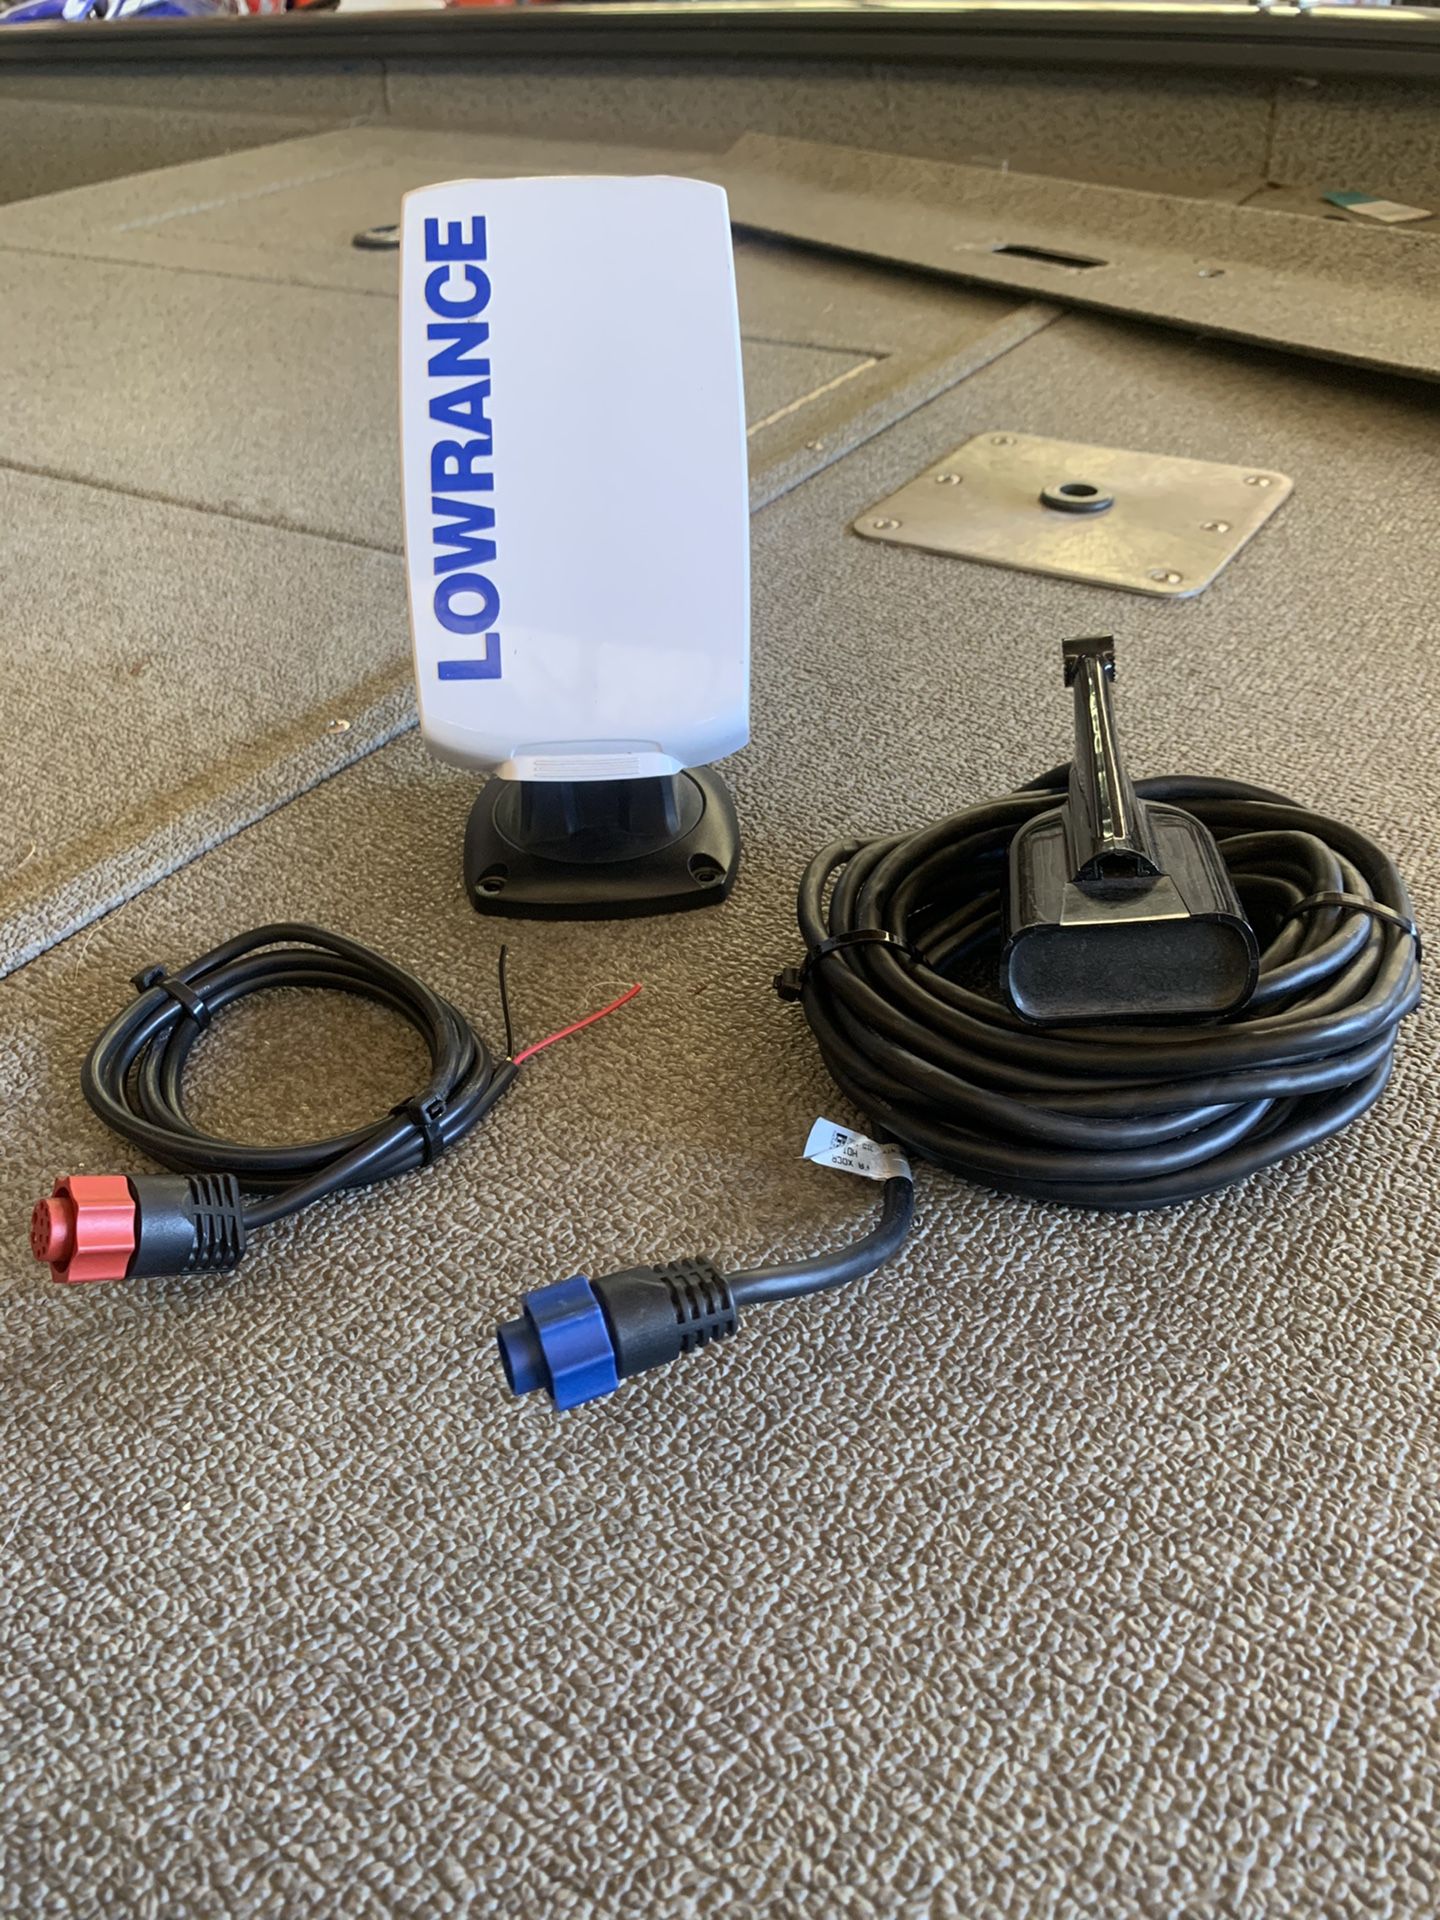 Lowrance hook 4x chirp - fish finder